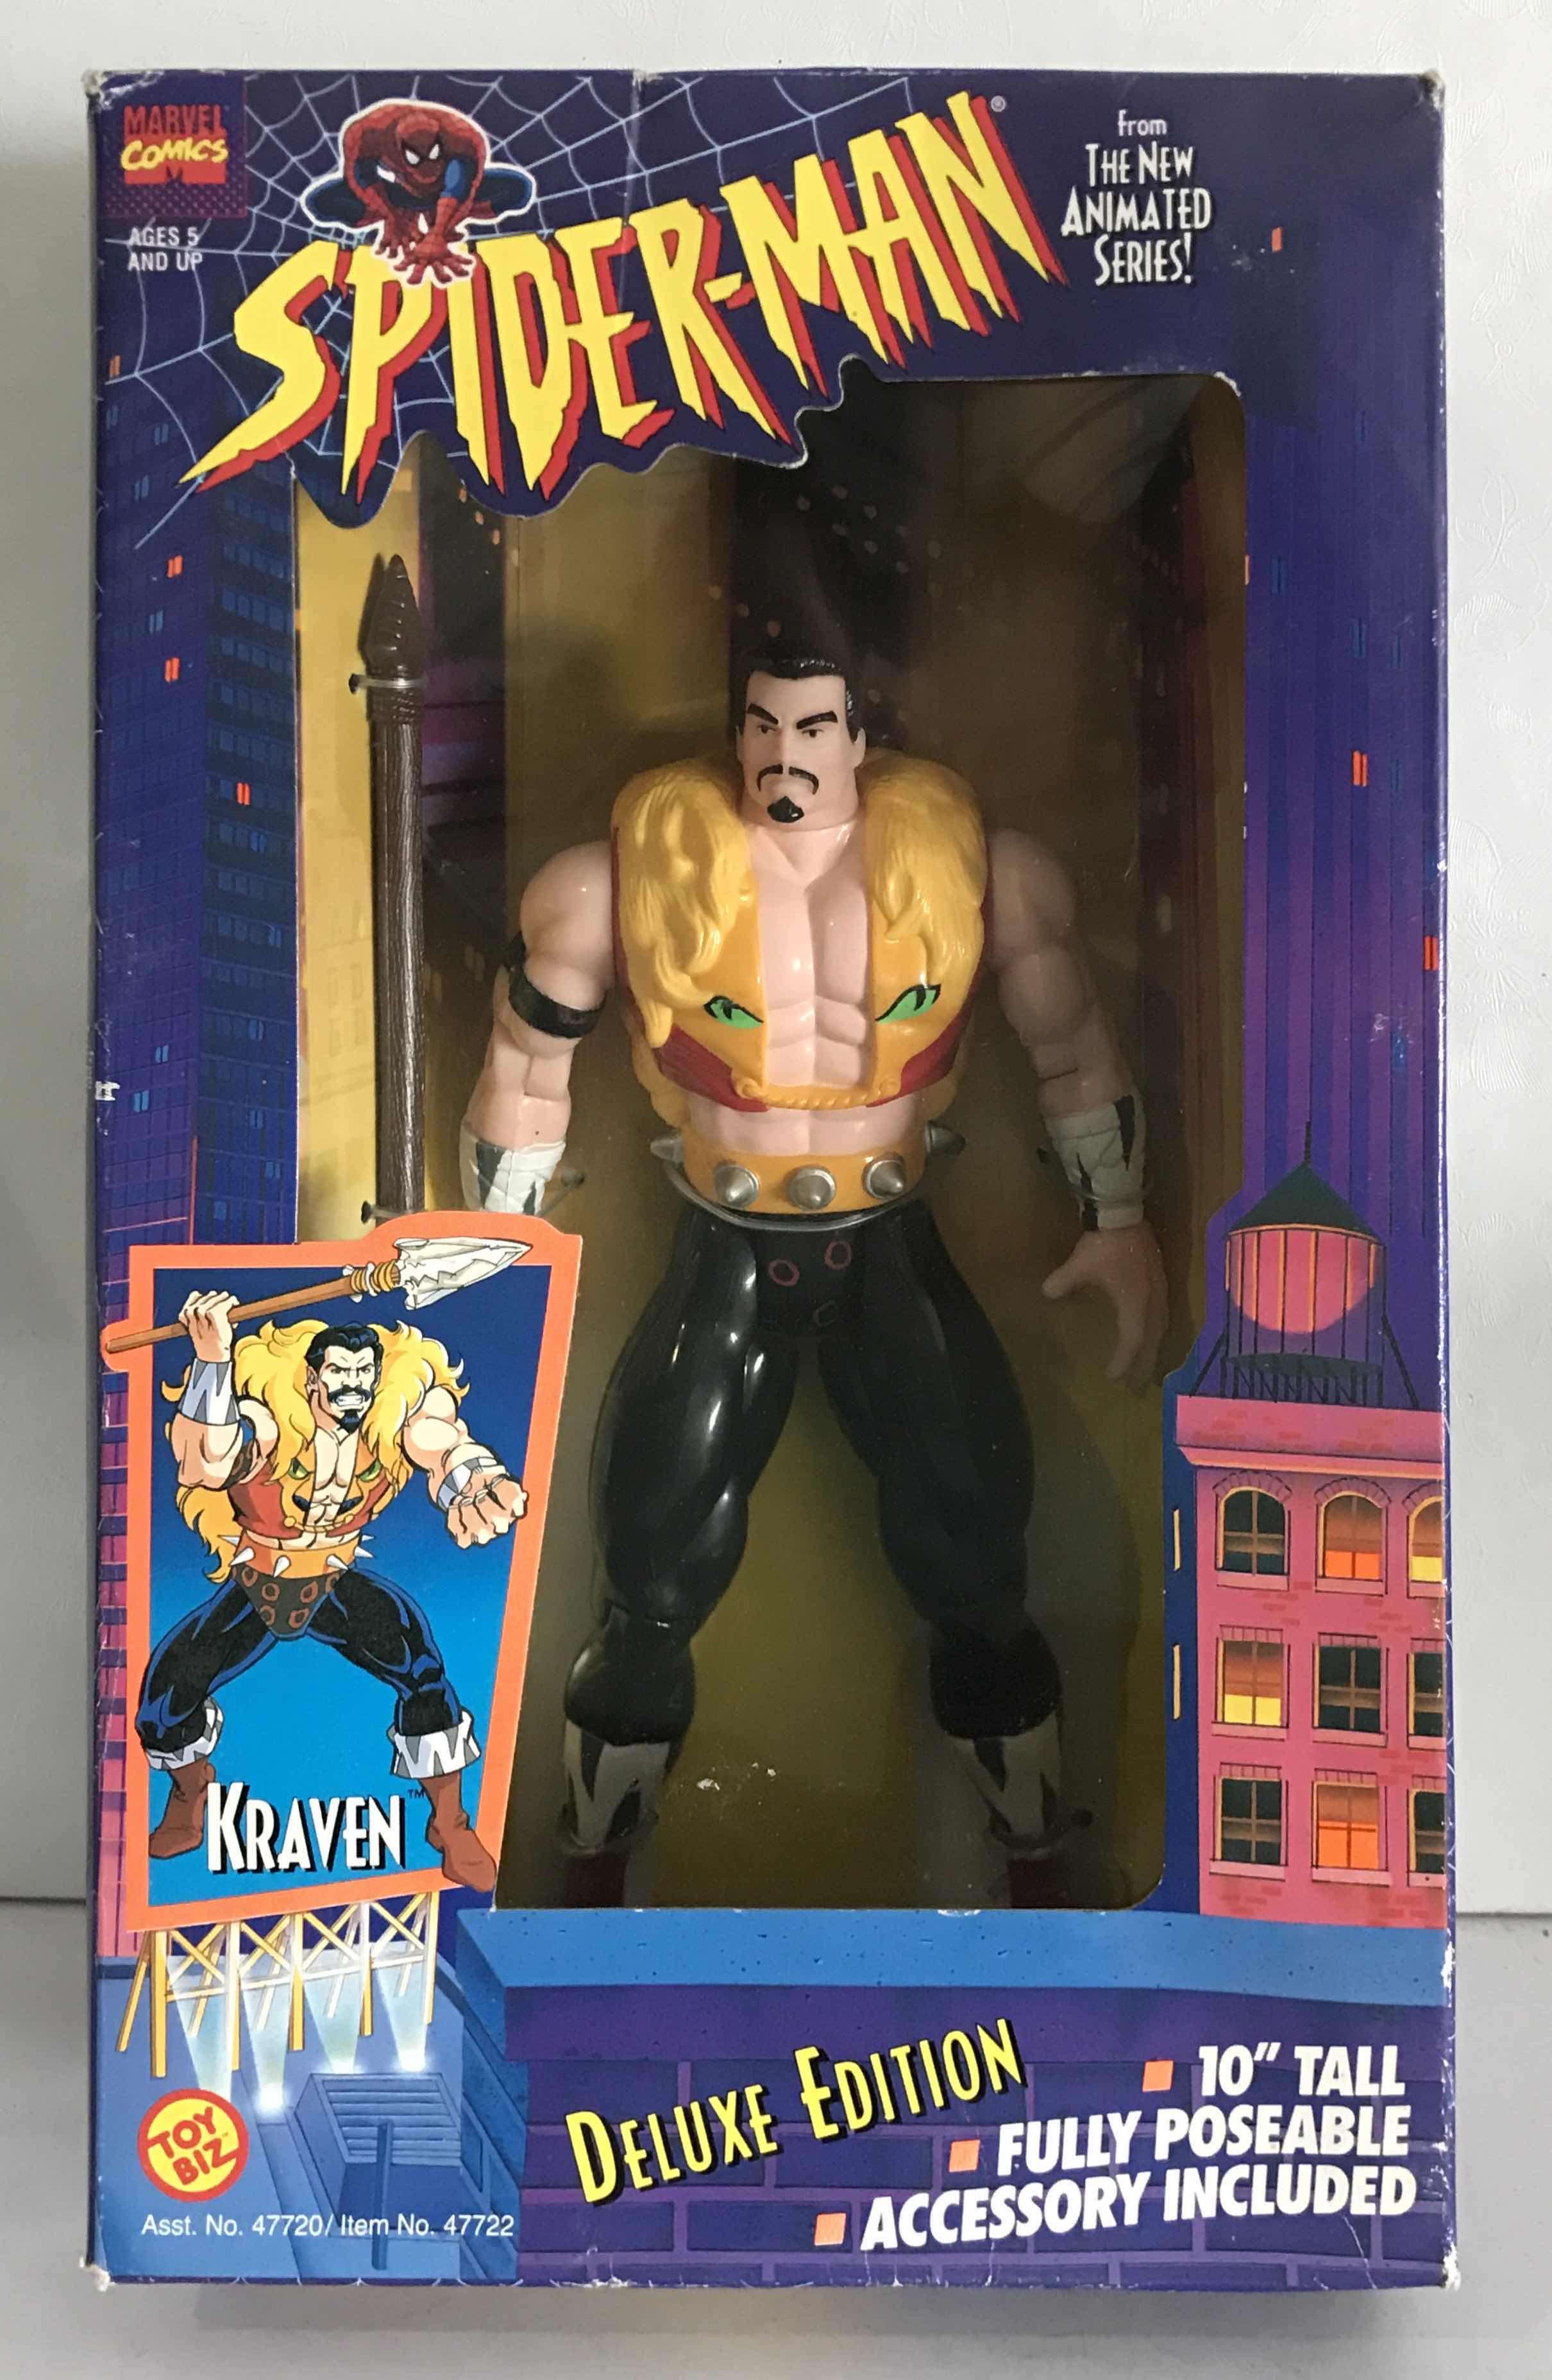 Photo 1 of NIB SPIDER MAN THE NEW ANIMATED SERIES DELUXE EDITION  “ KRAVEN” - RETAIL PRICE $49.00